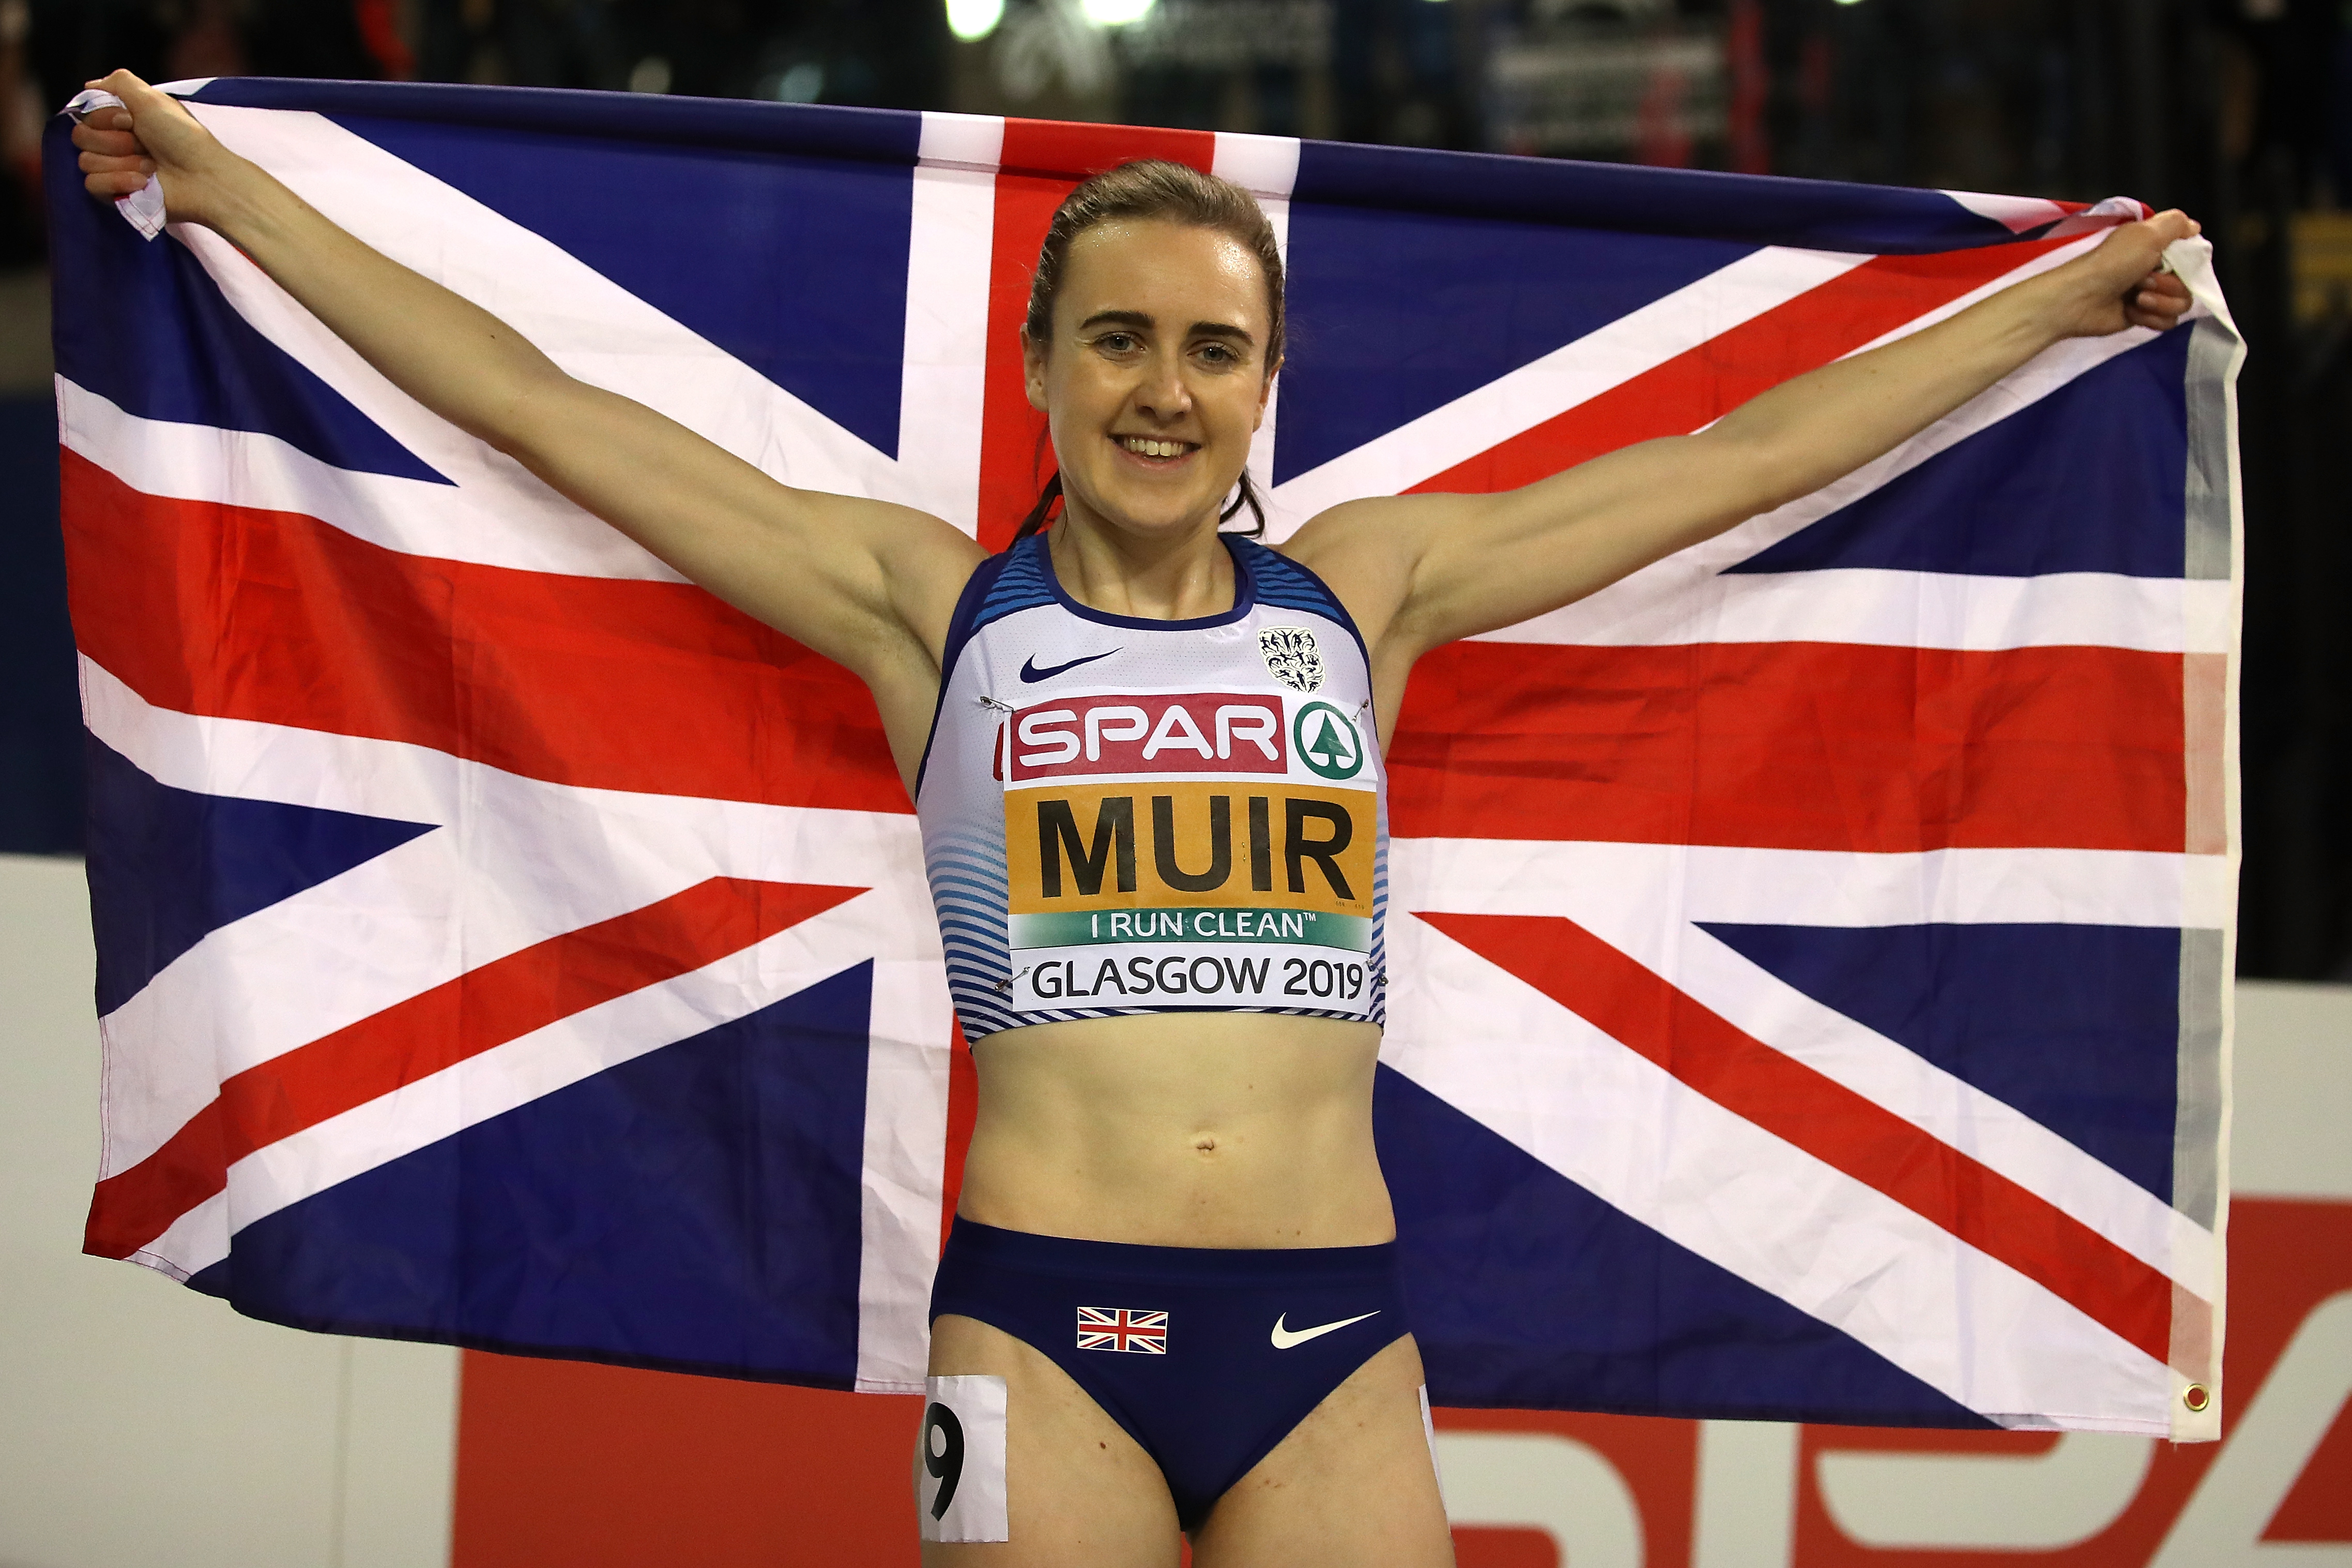 BRITISH RECORD FOR 4X400M WOMEN ON FINAL MORNING AT WORLD INDOORS